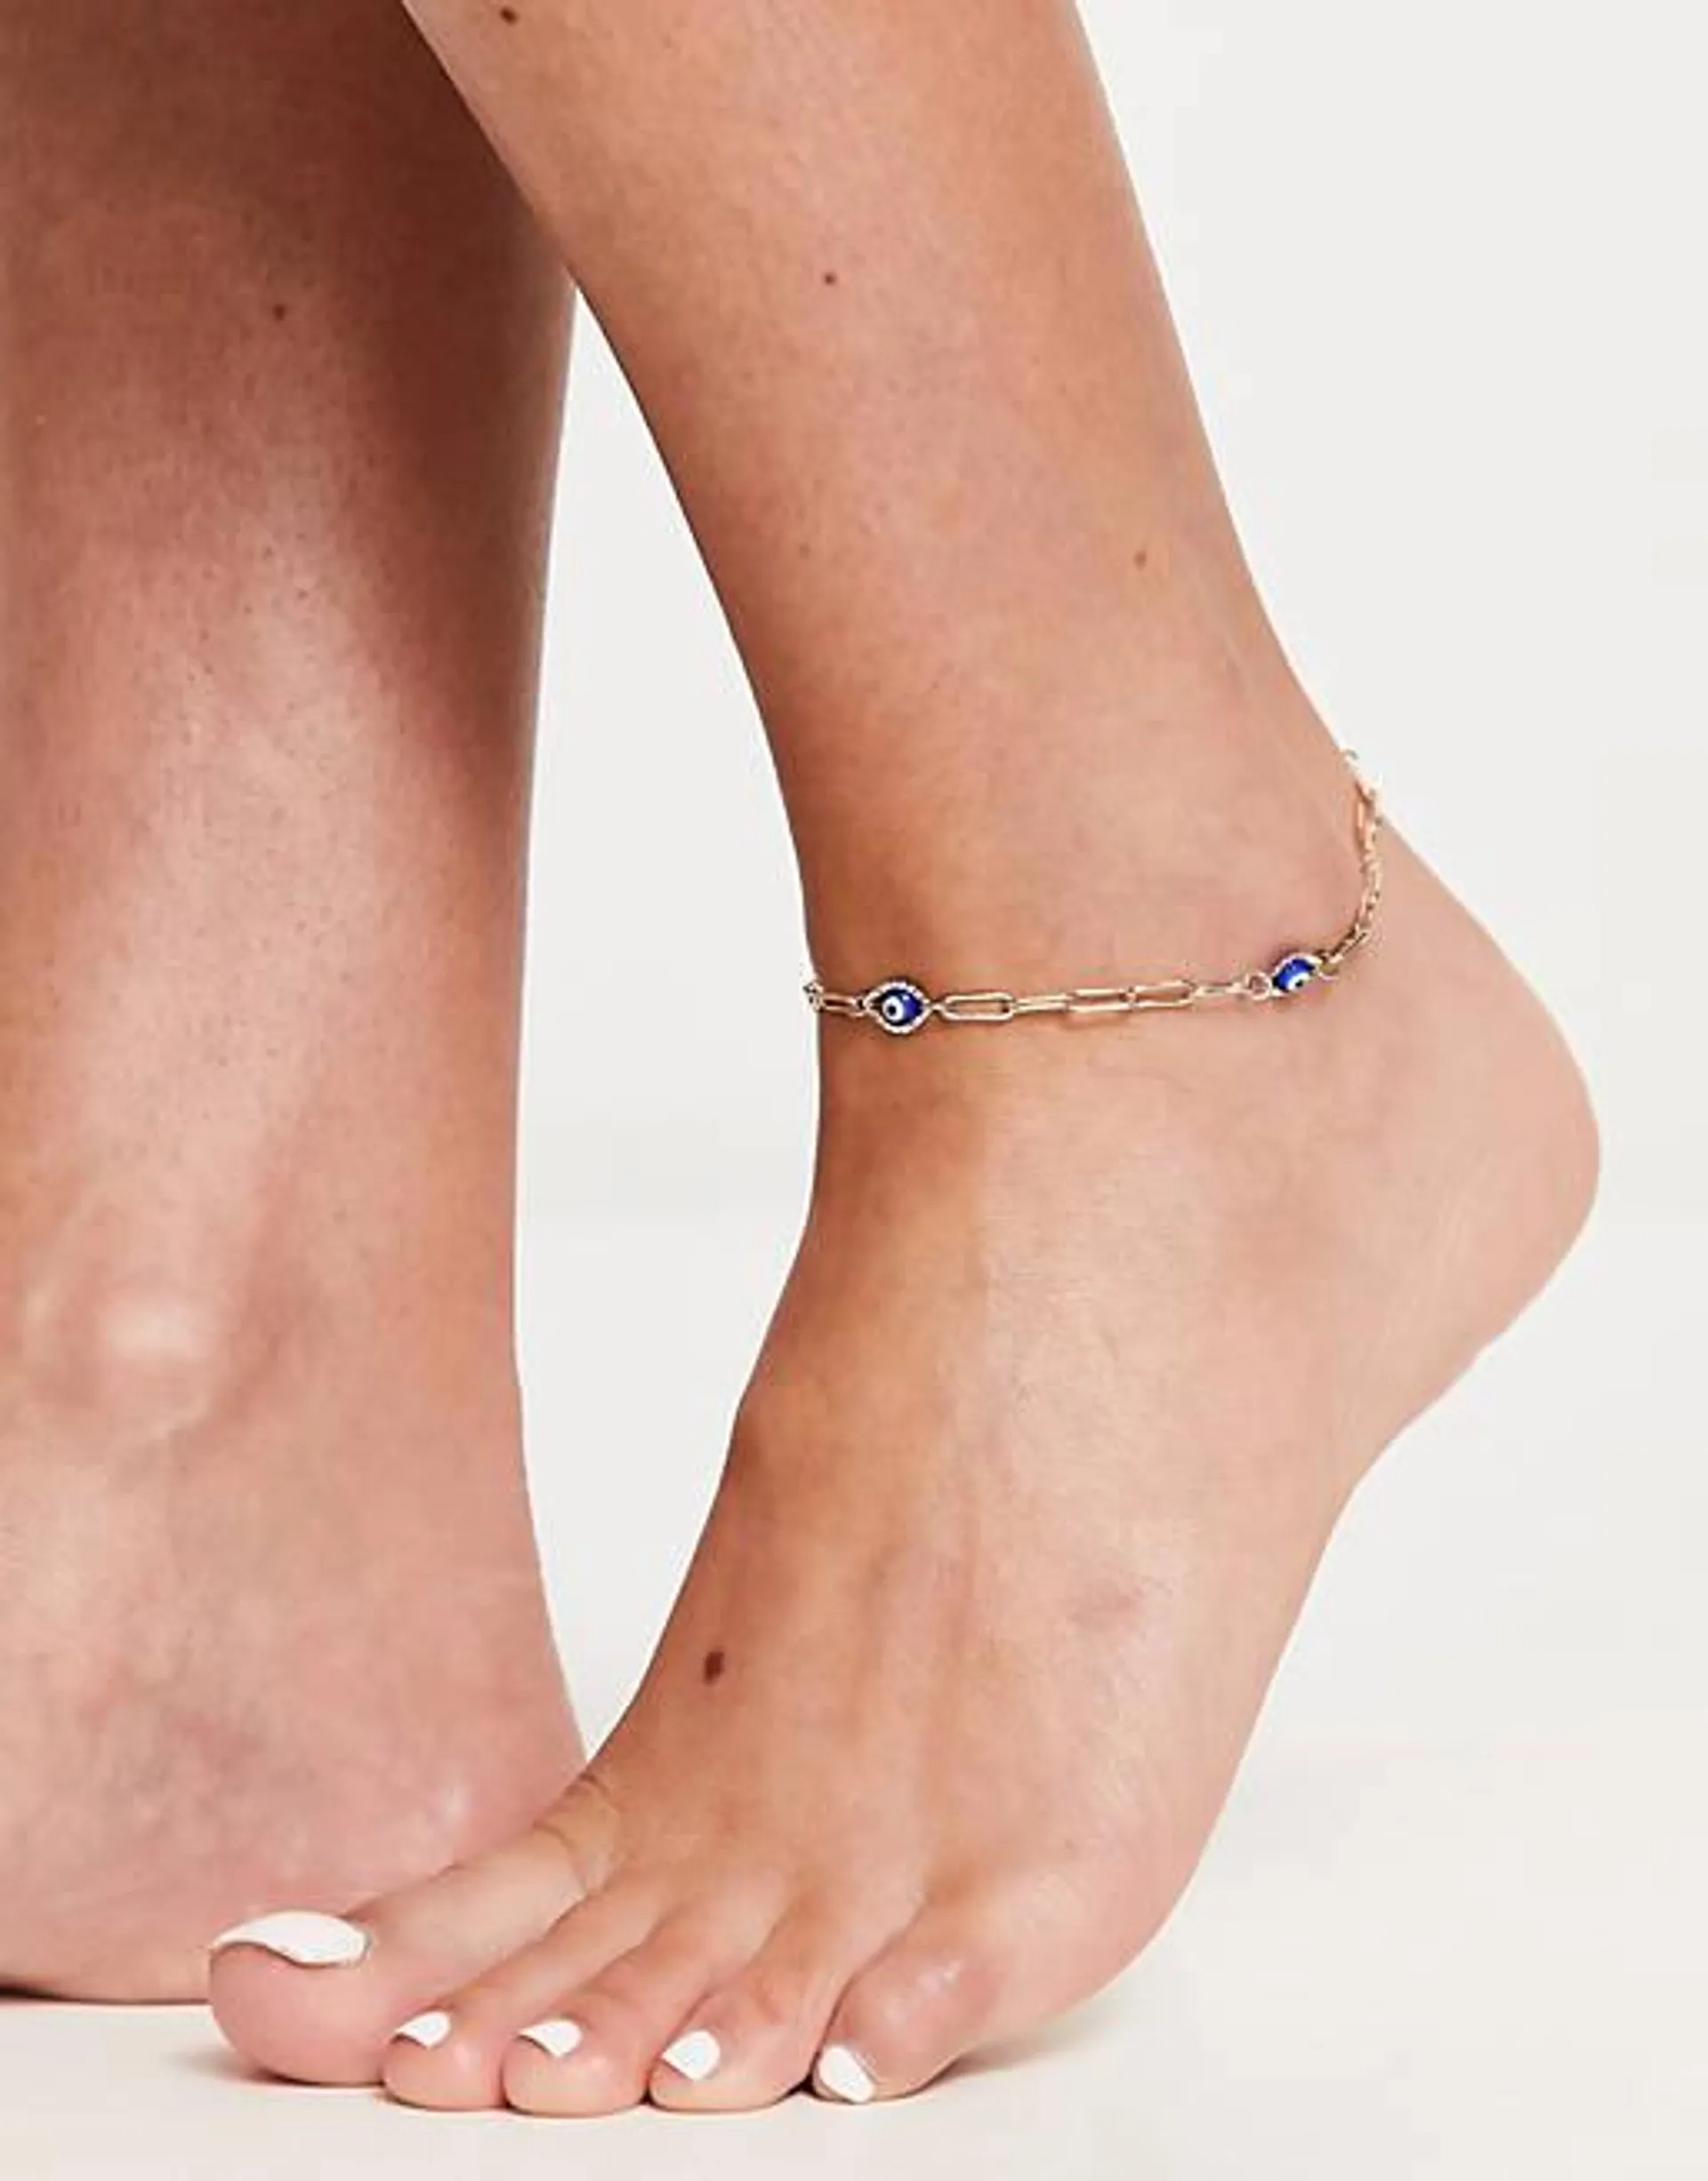 ASOS DESIGN anklet with blue eye charms in gold tone